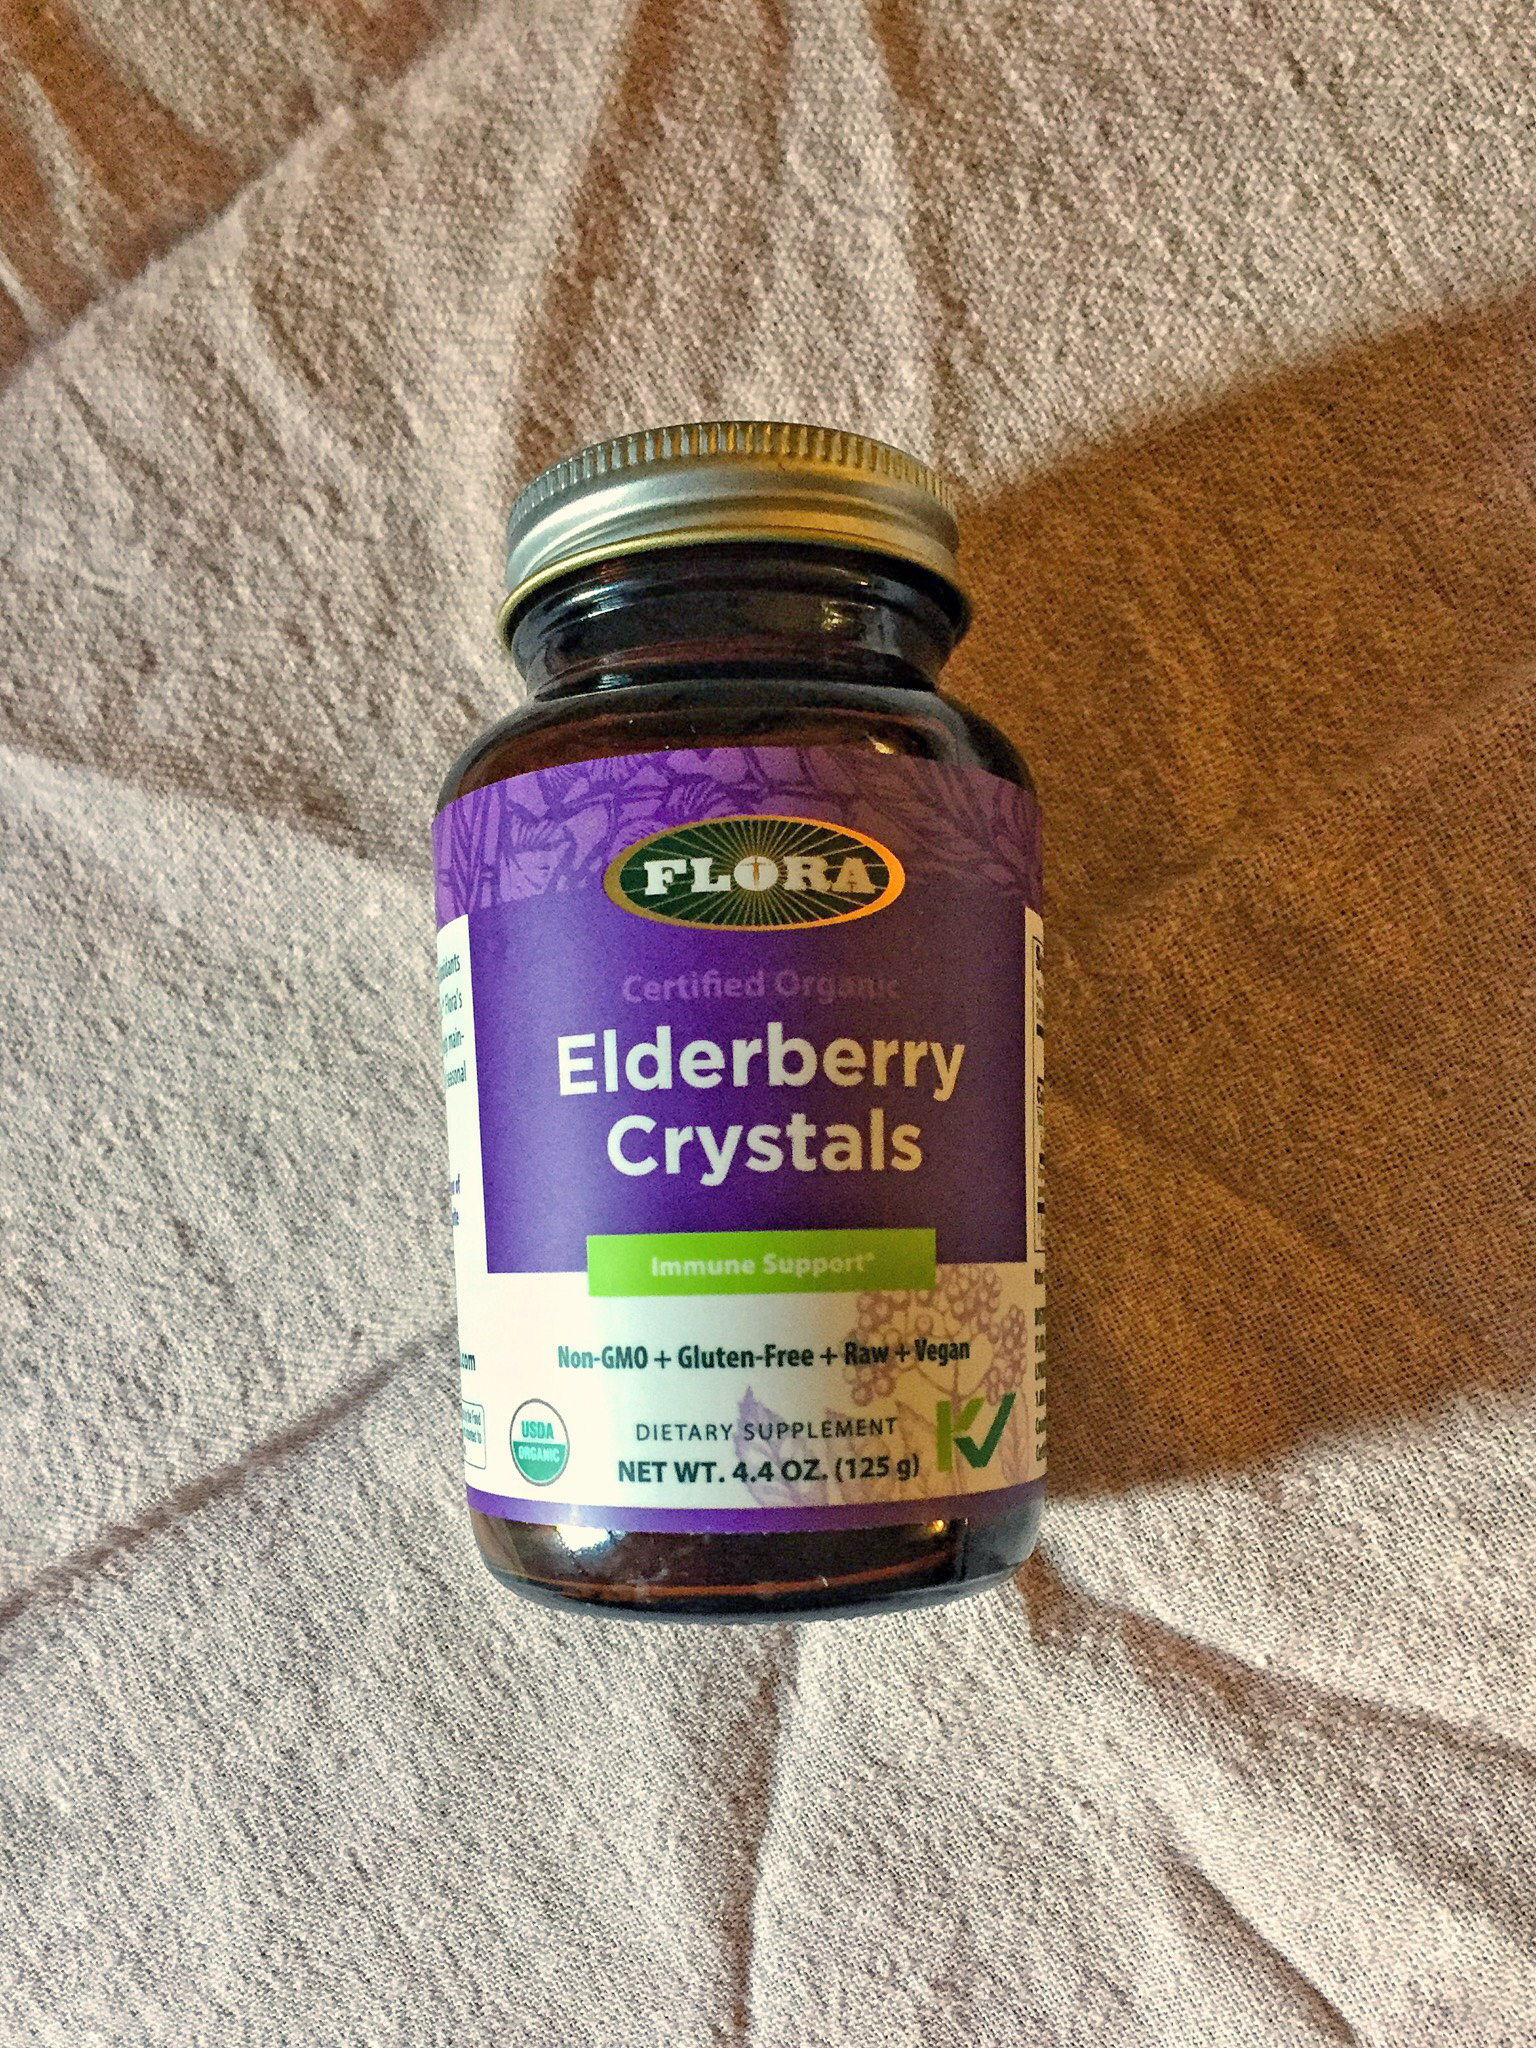 Holidays Leaving You Frazzled? Try Elderberry Crystals for an Immune Boost This Winter